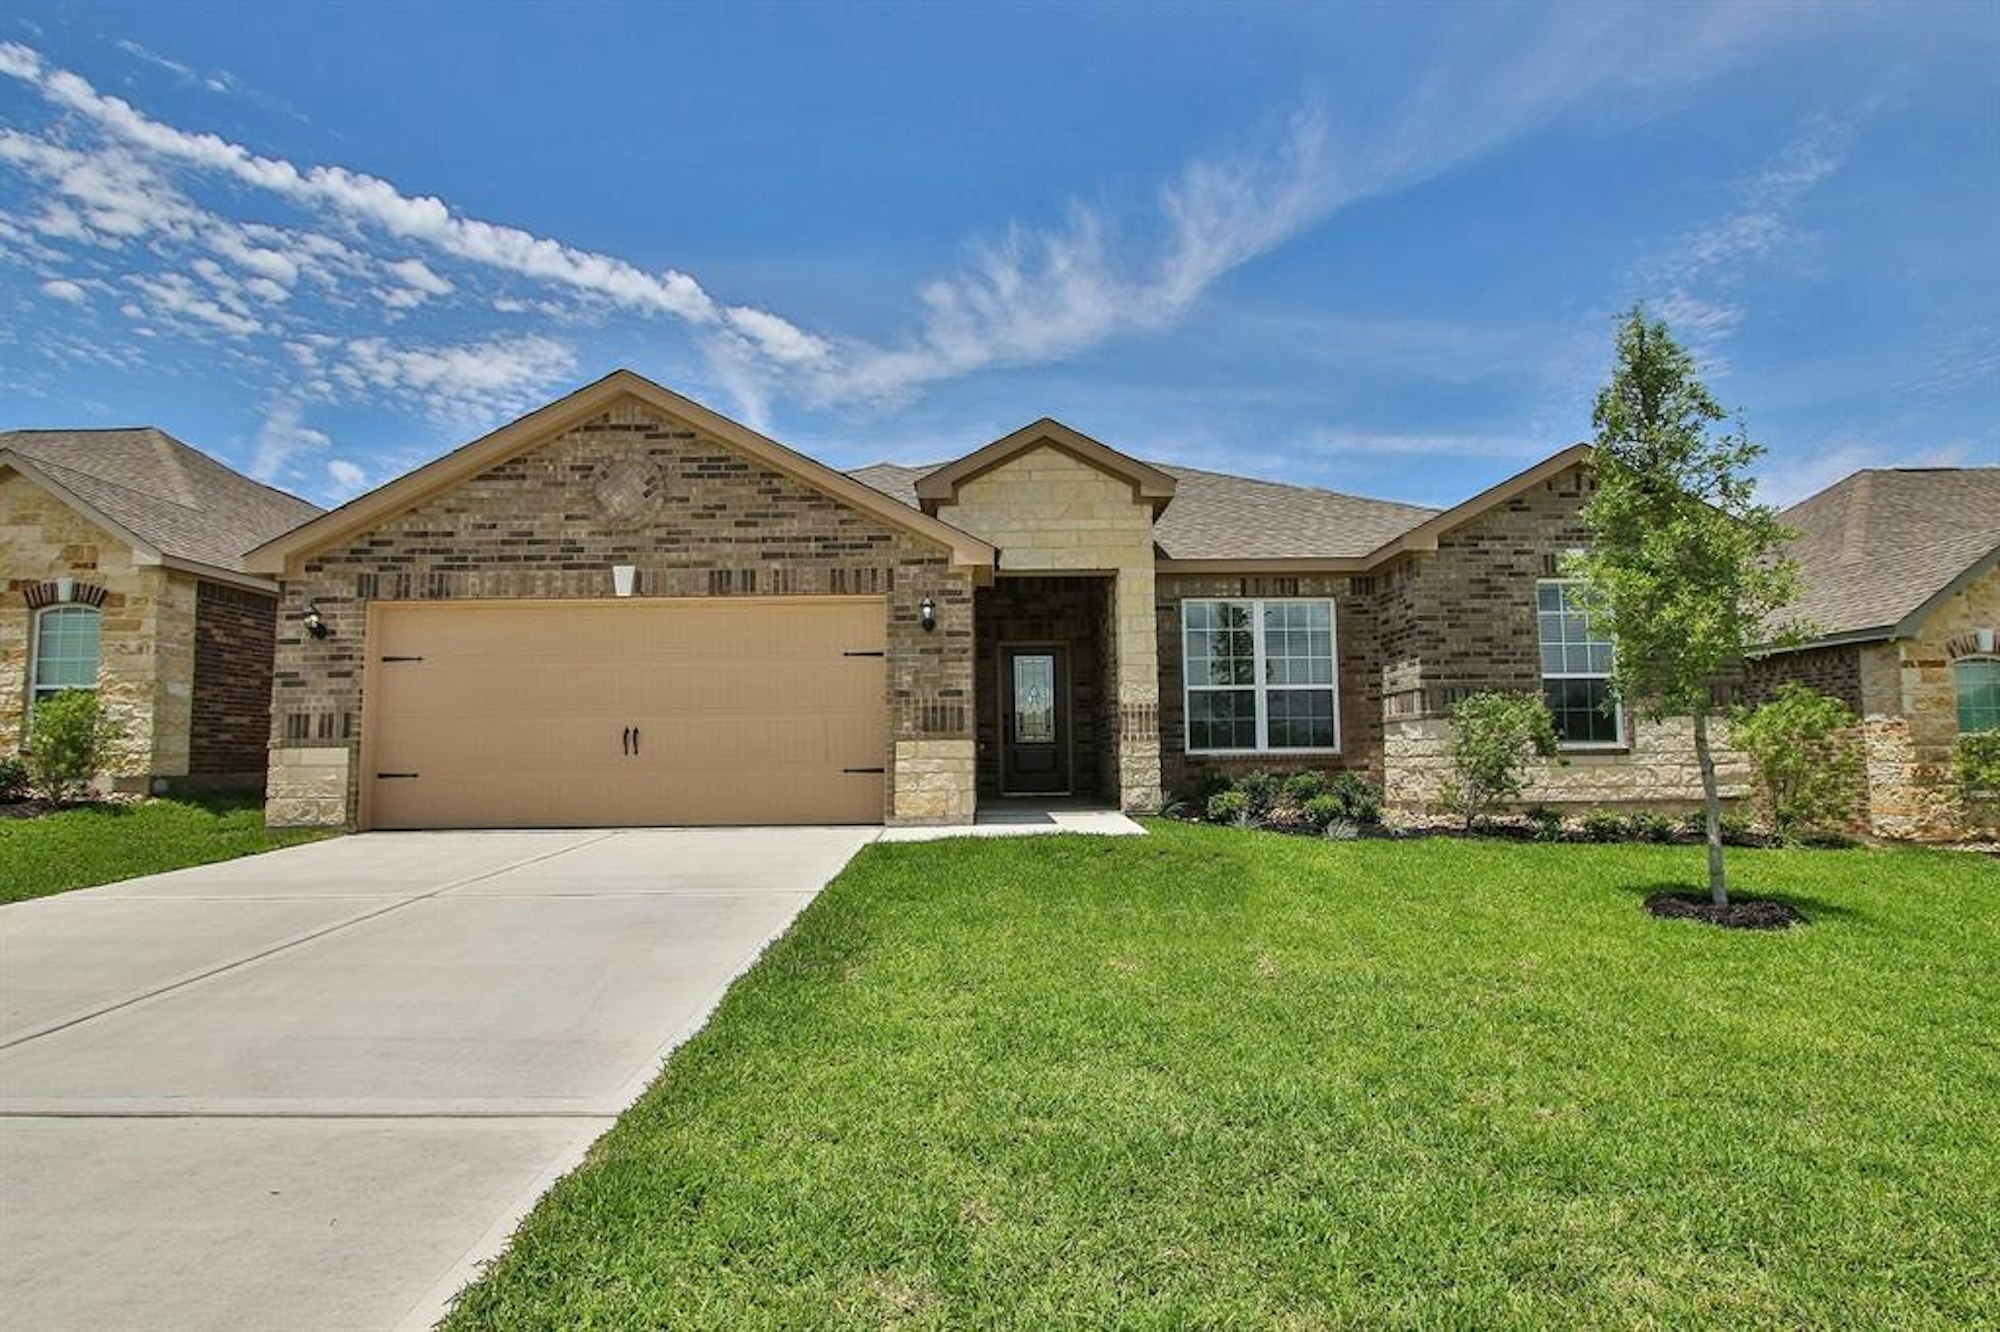 Photo 1 of 24 - 21118 Sunshine Meadow Dr, Hockley, TX 77447